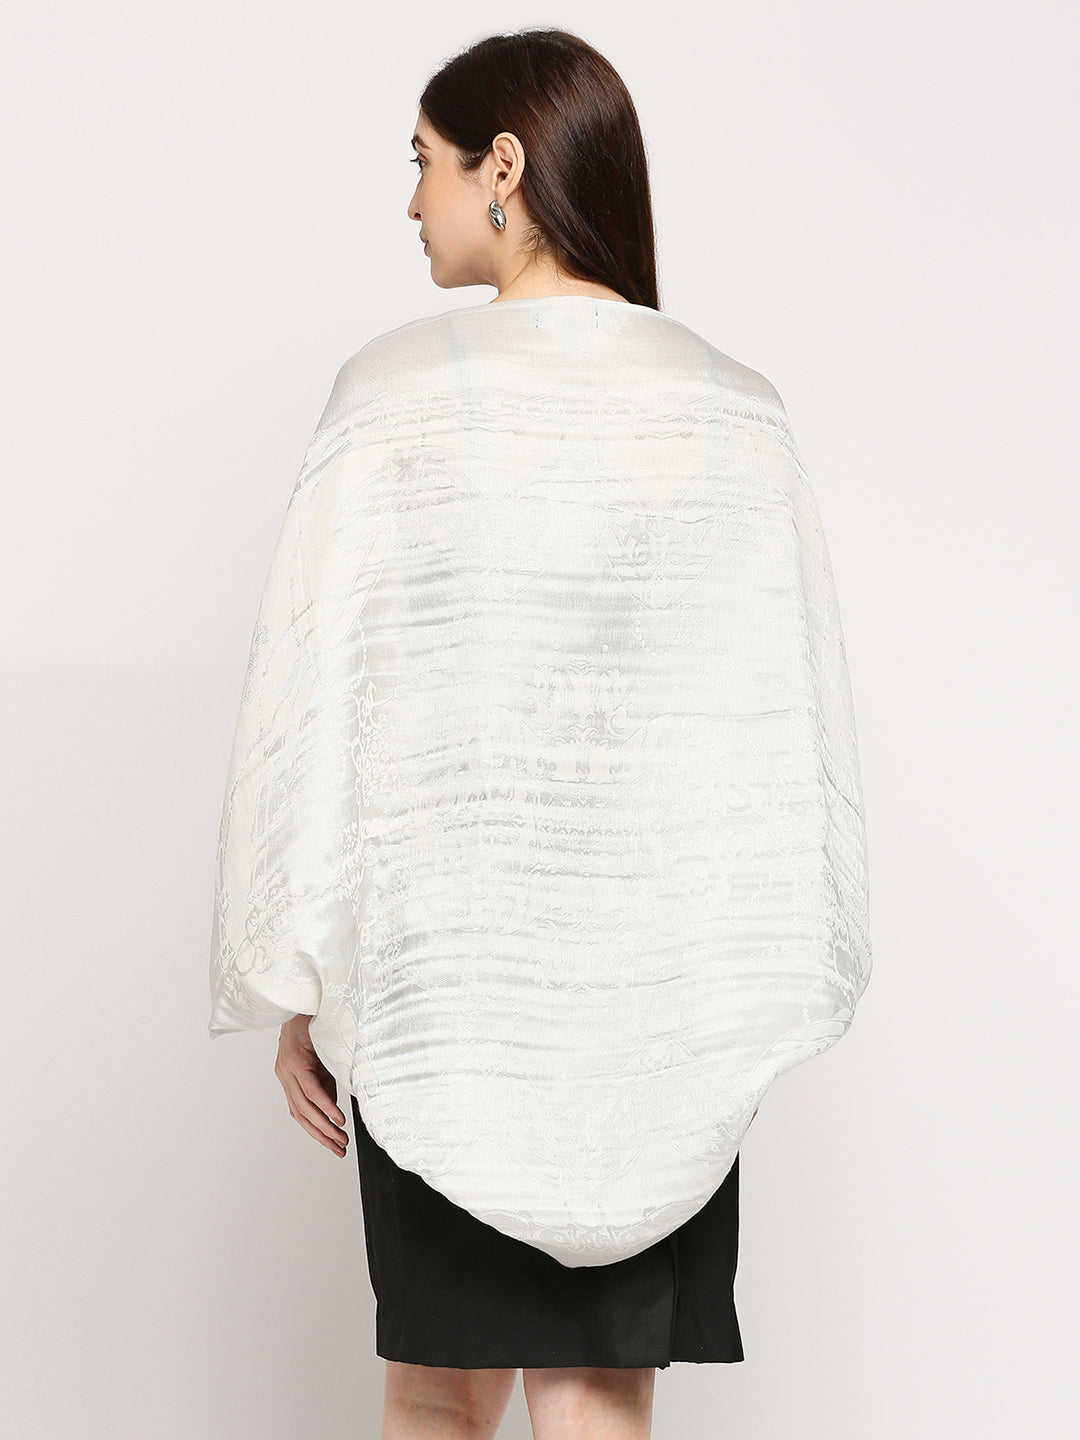 French Rope & Chains Patterned Brocade White Cocoon Shrug